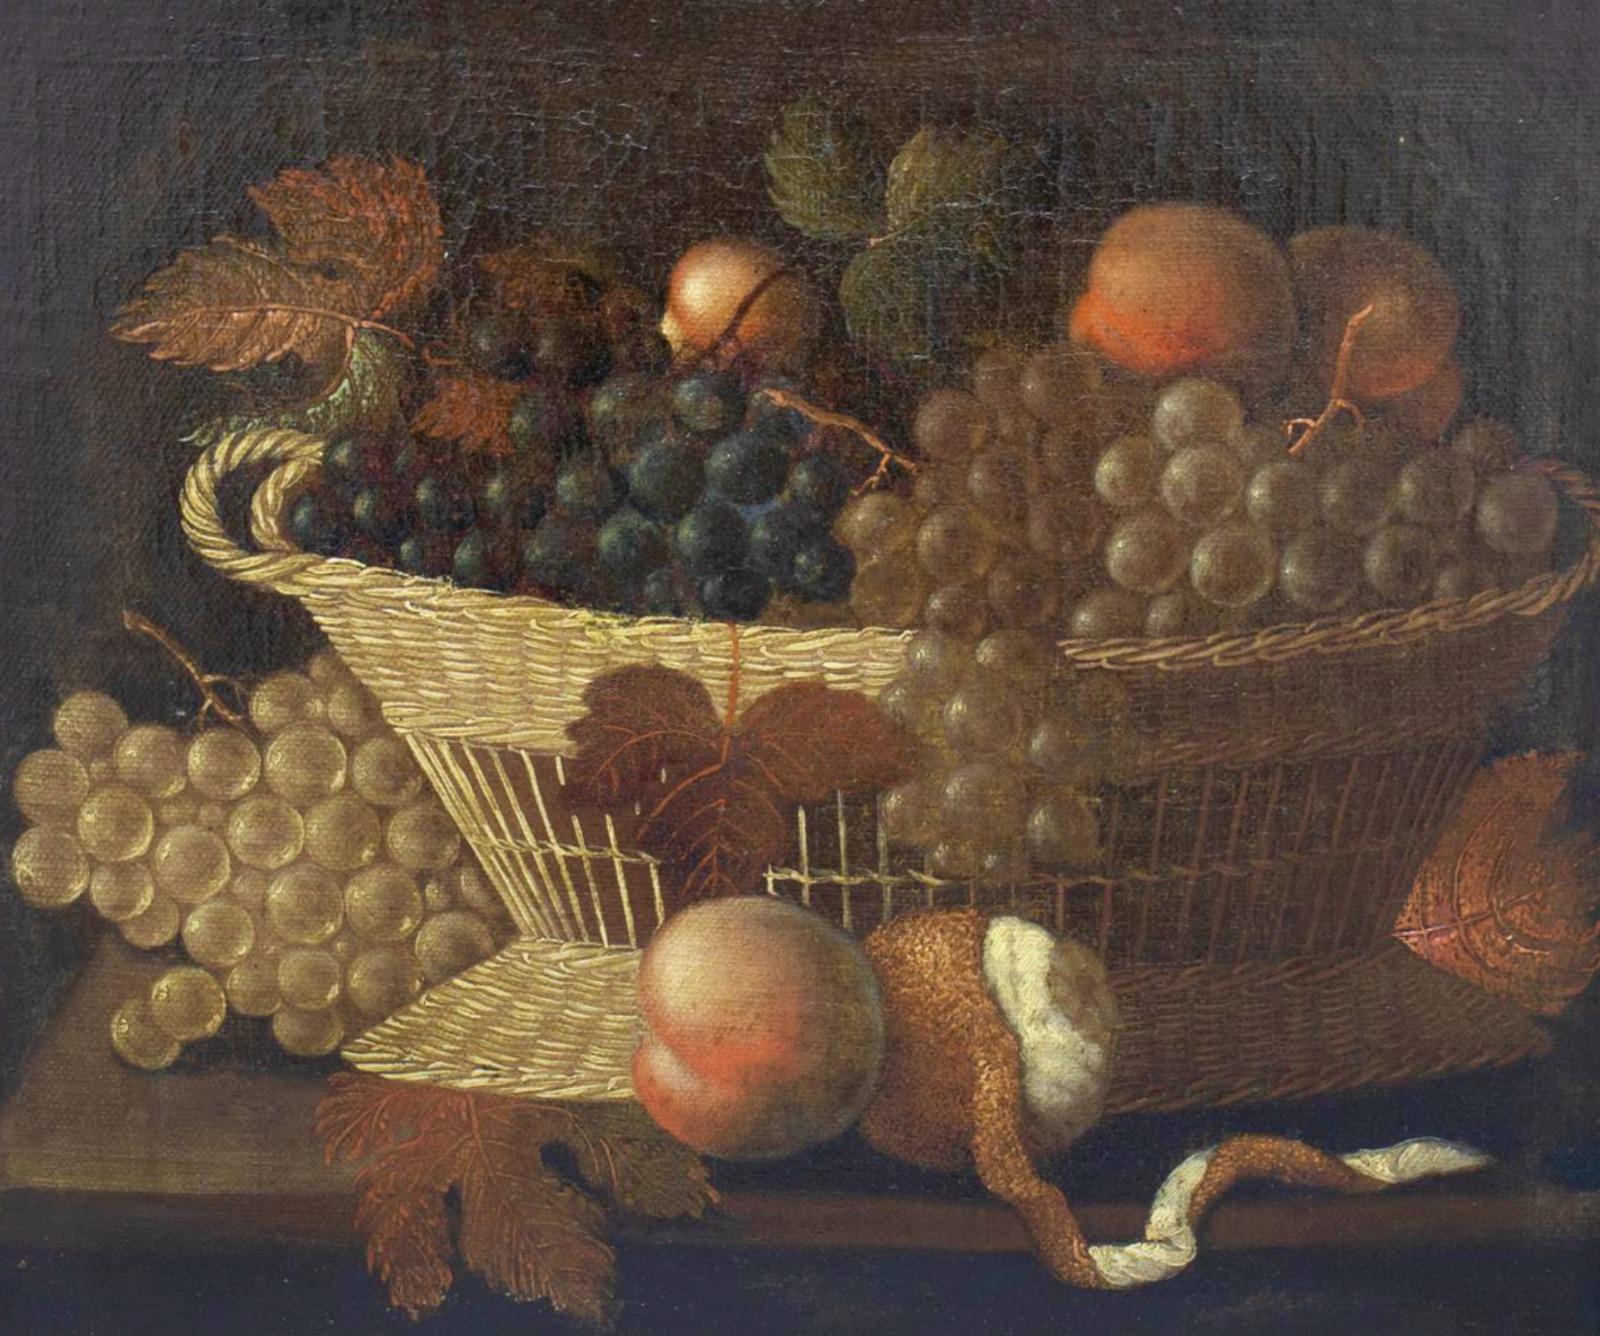 Italian School 17th century 'Still Life Grape Basket' 
Oil on canvas, framed, 
Without, dimensions: 38.5 x 34 cm, 
Frame 55 x 50 cm, 
Condition: good, relined, old restored.